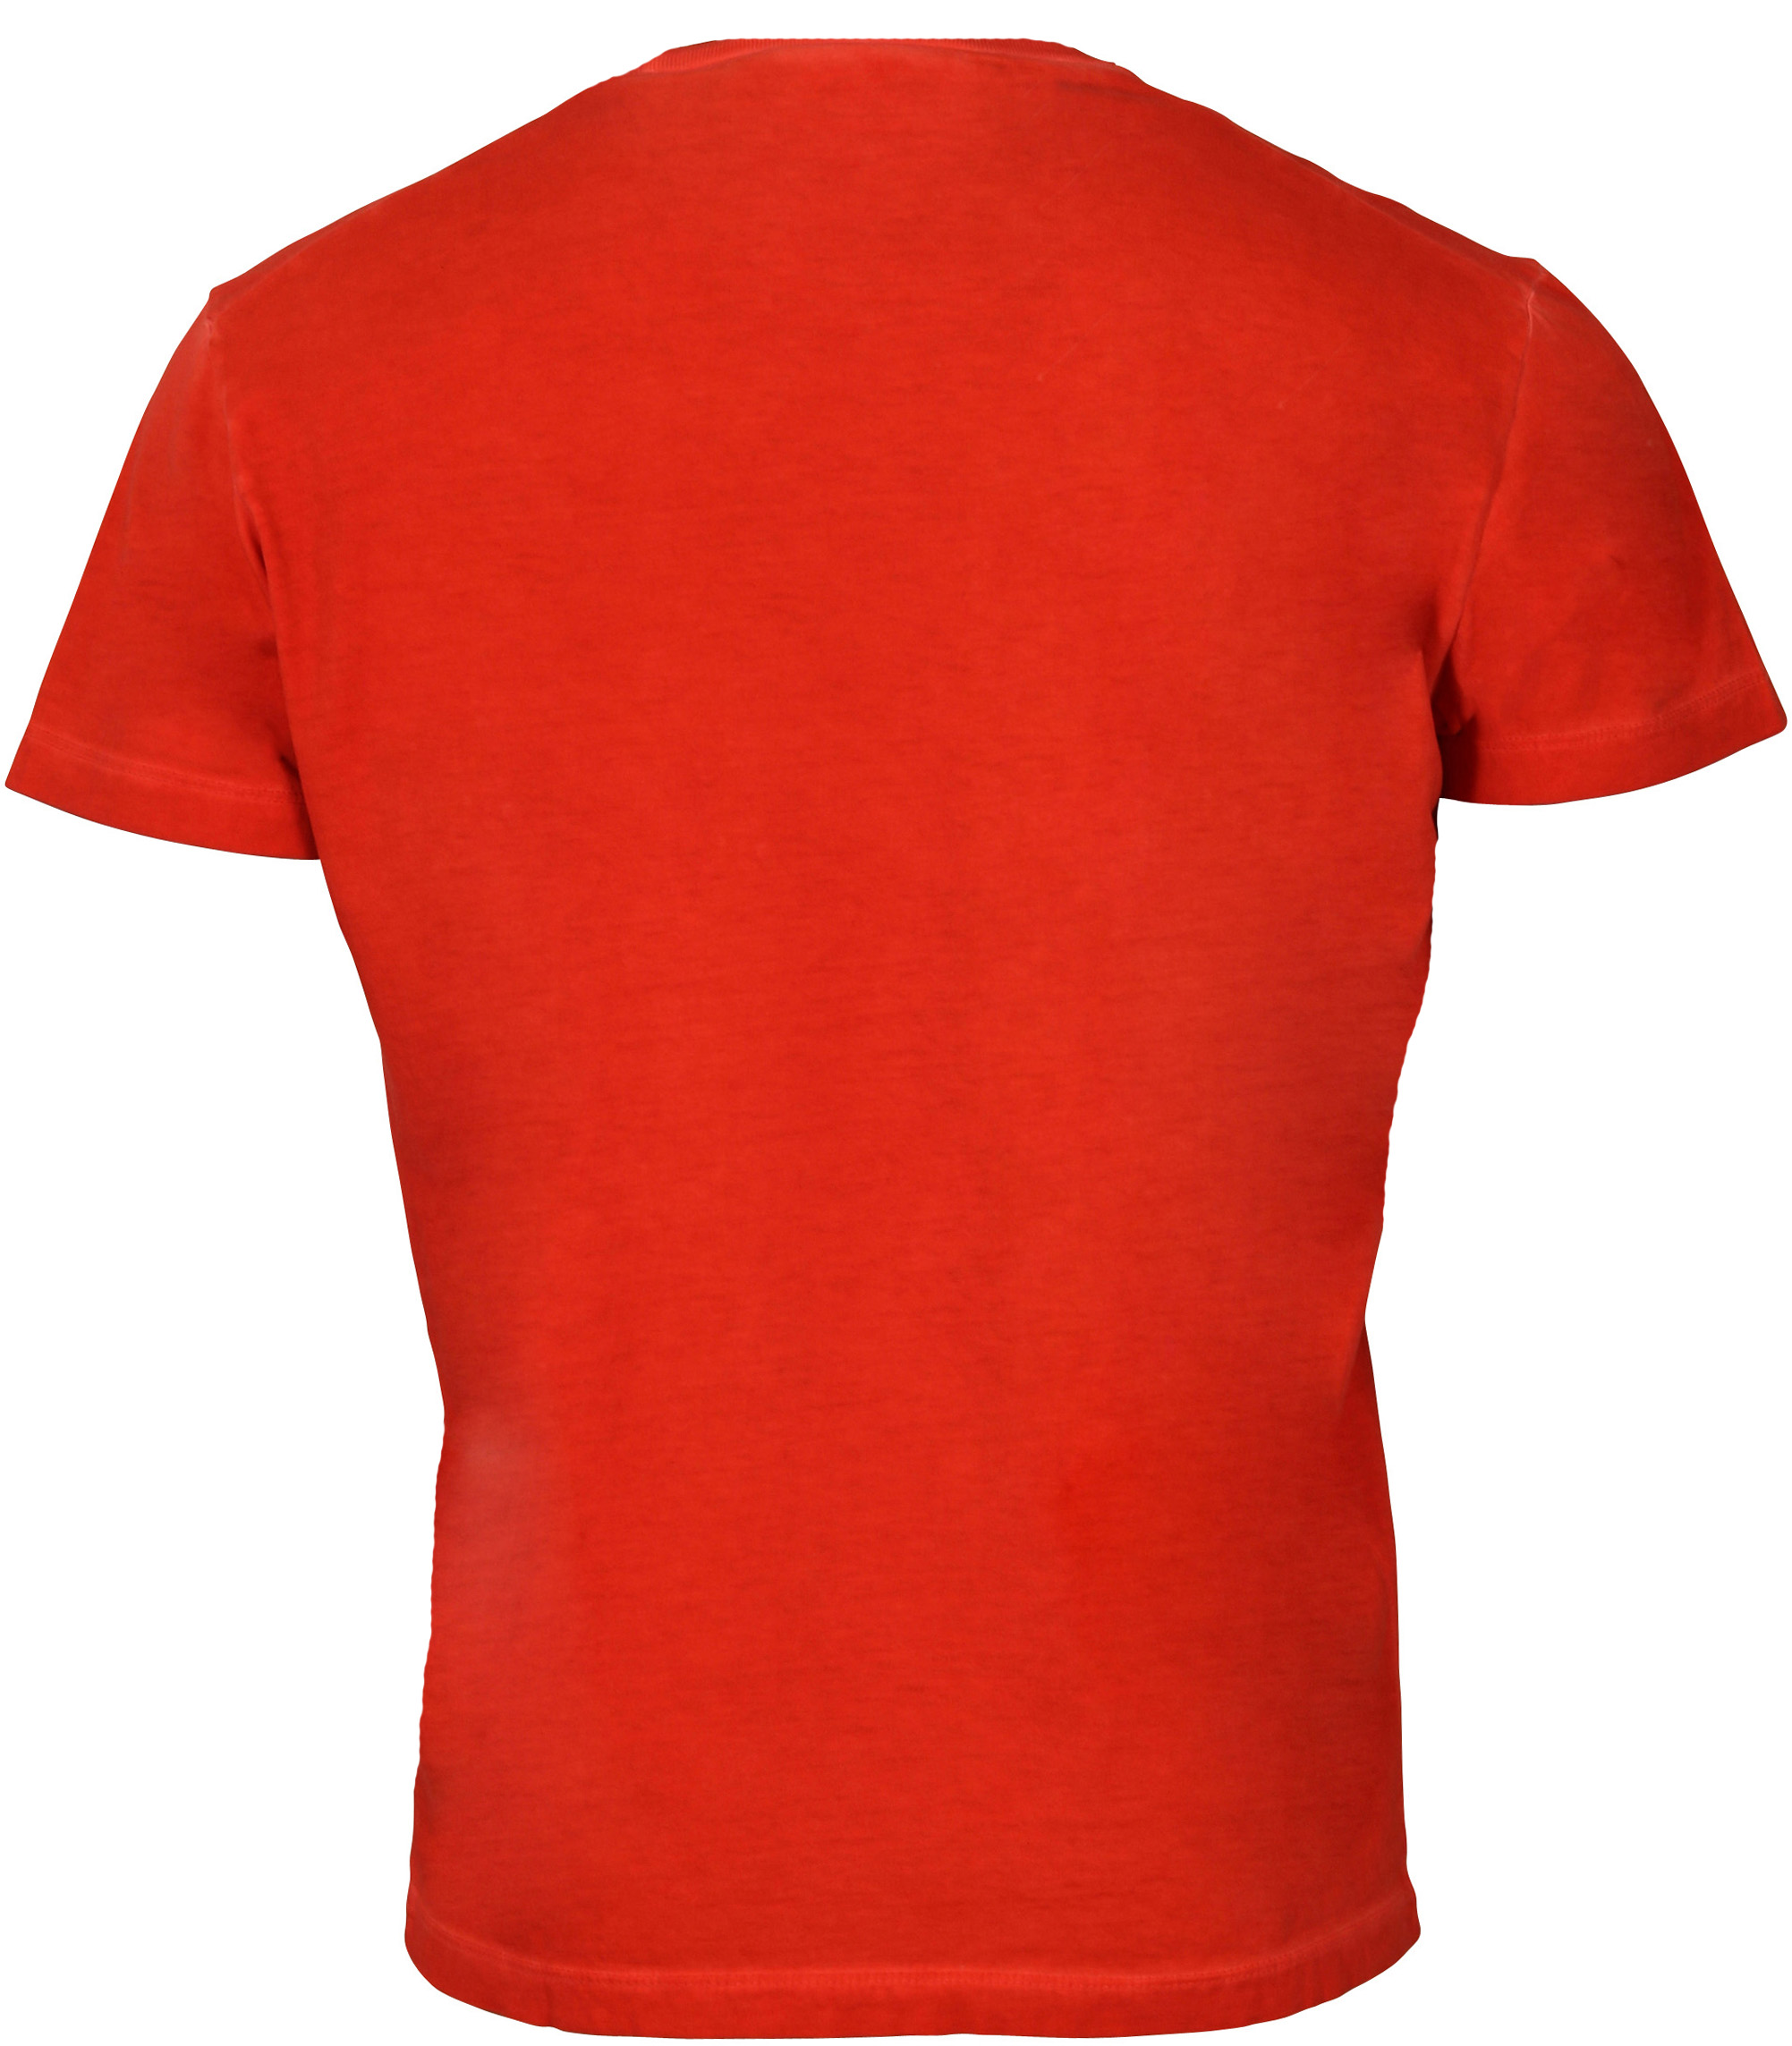 Dsquared T-Shirt Red Printed M